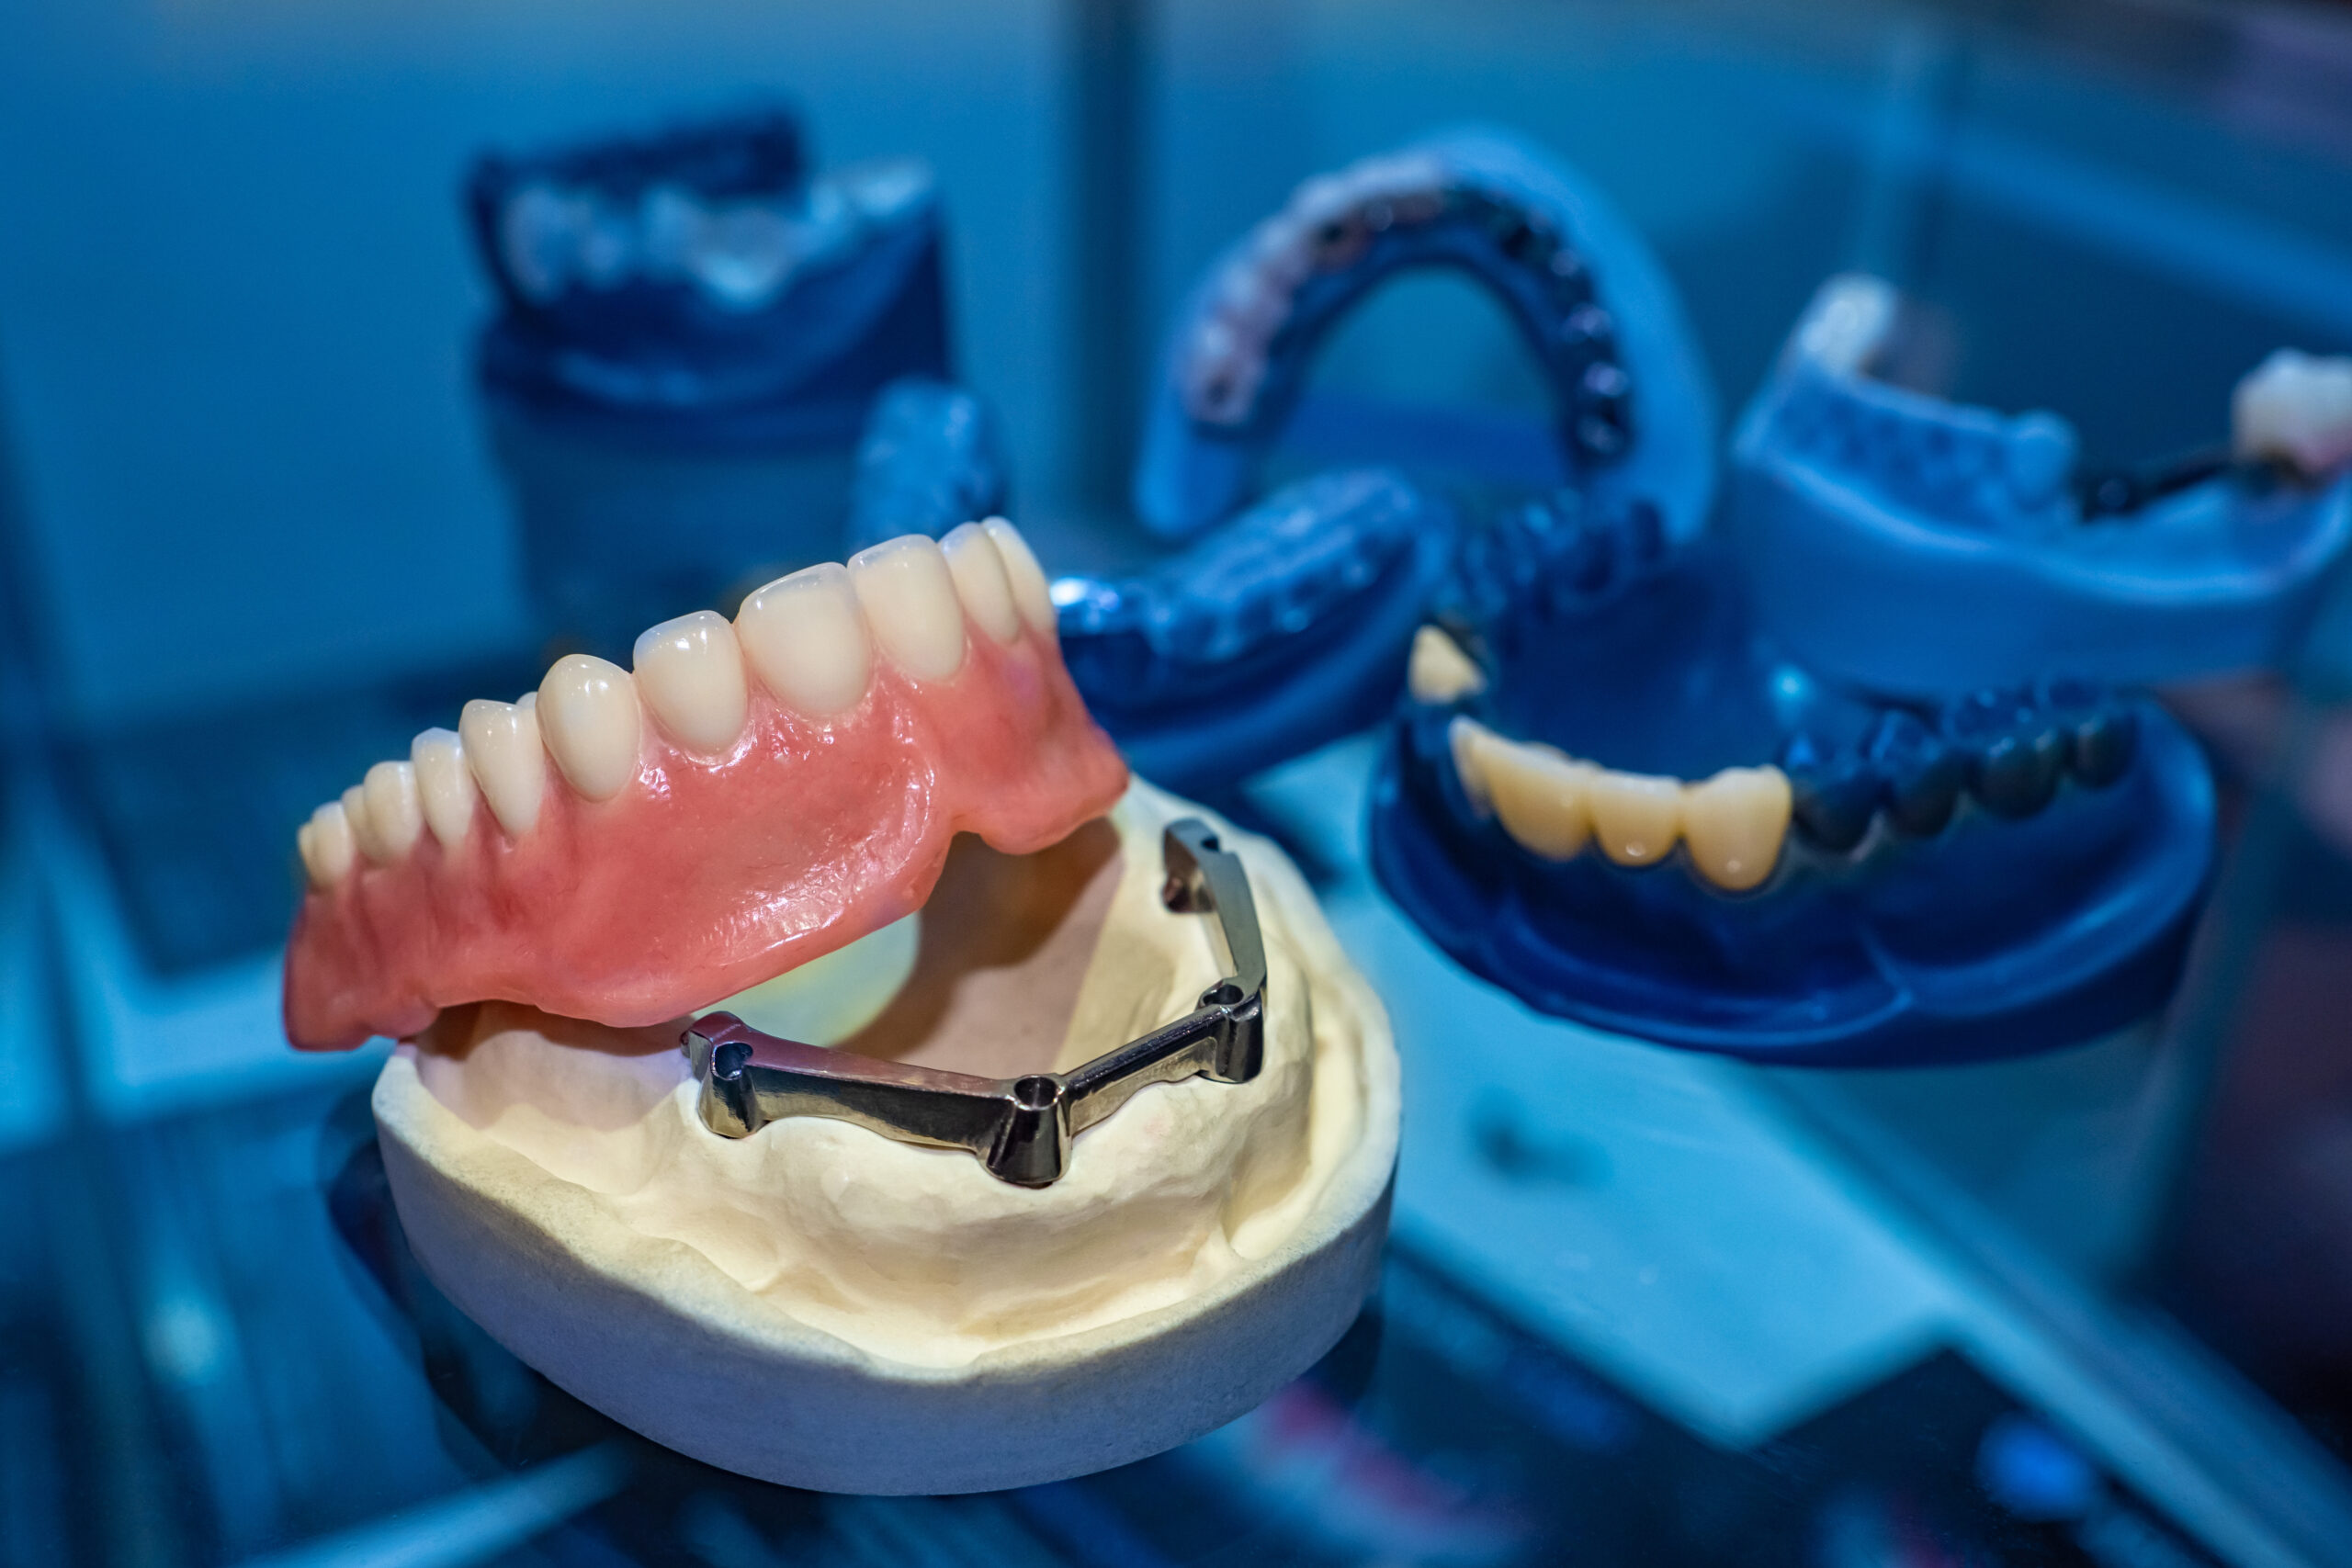 image of a dental implant denture on a prosthesis jaw in a dark and blue lit aesthetic dental room.